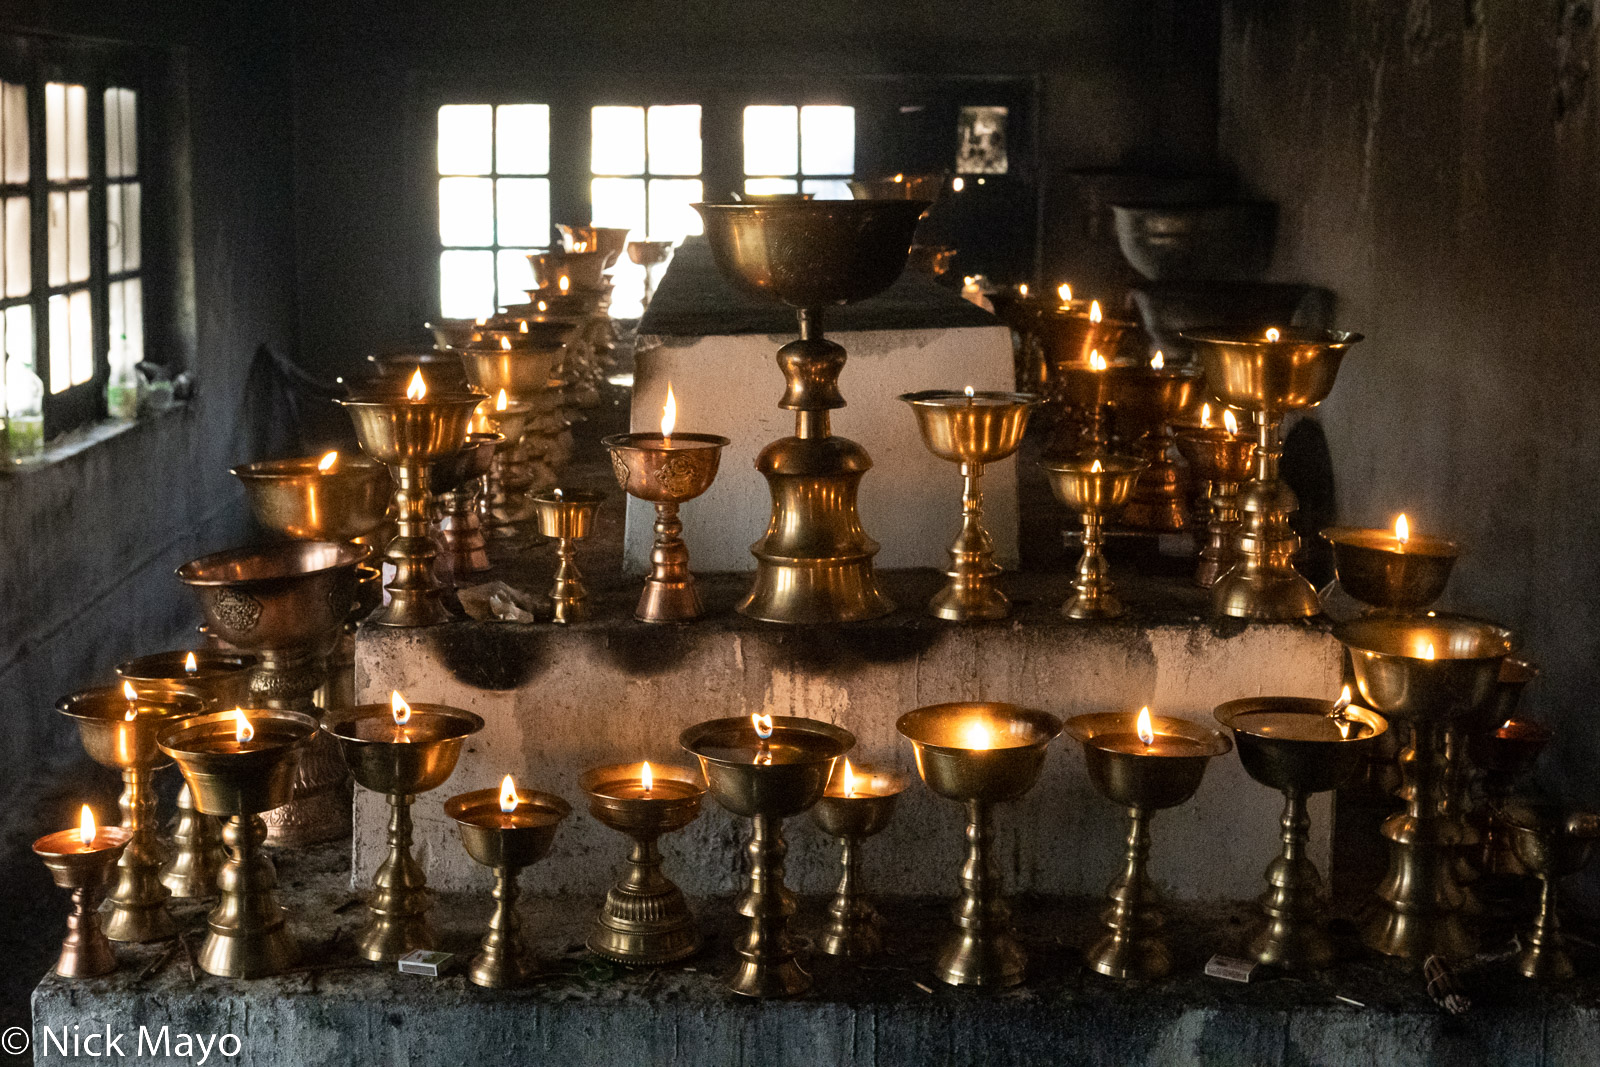 Butter lamps lit as votive offerings at Hemis monastery.